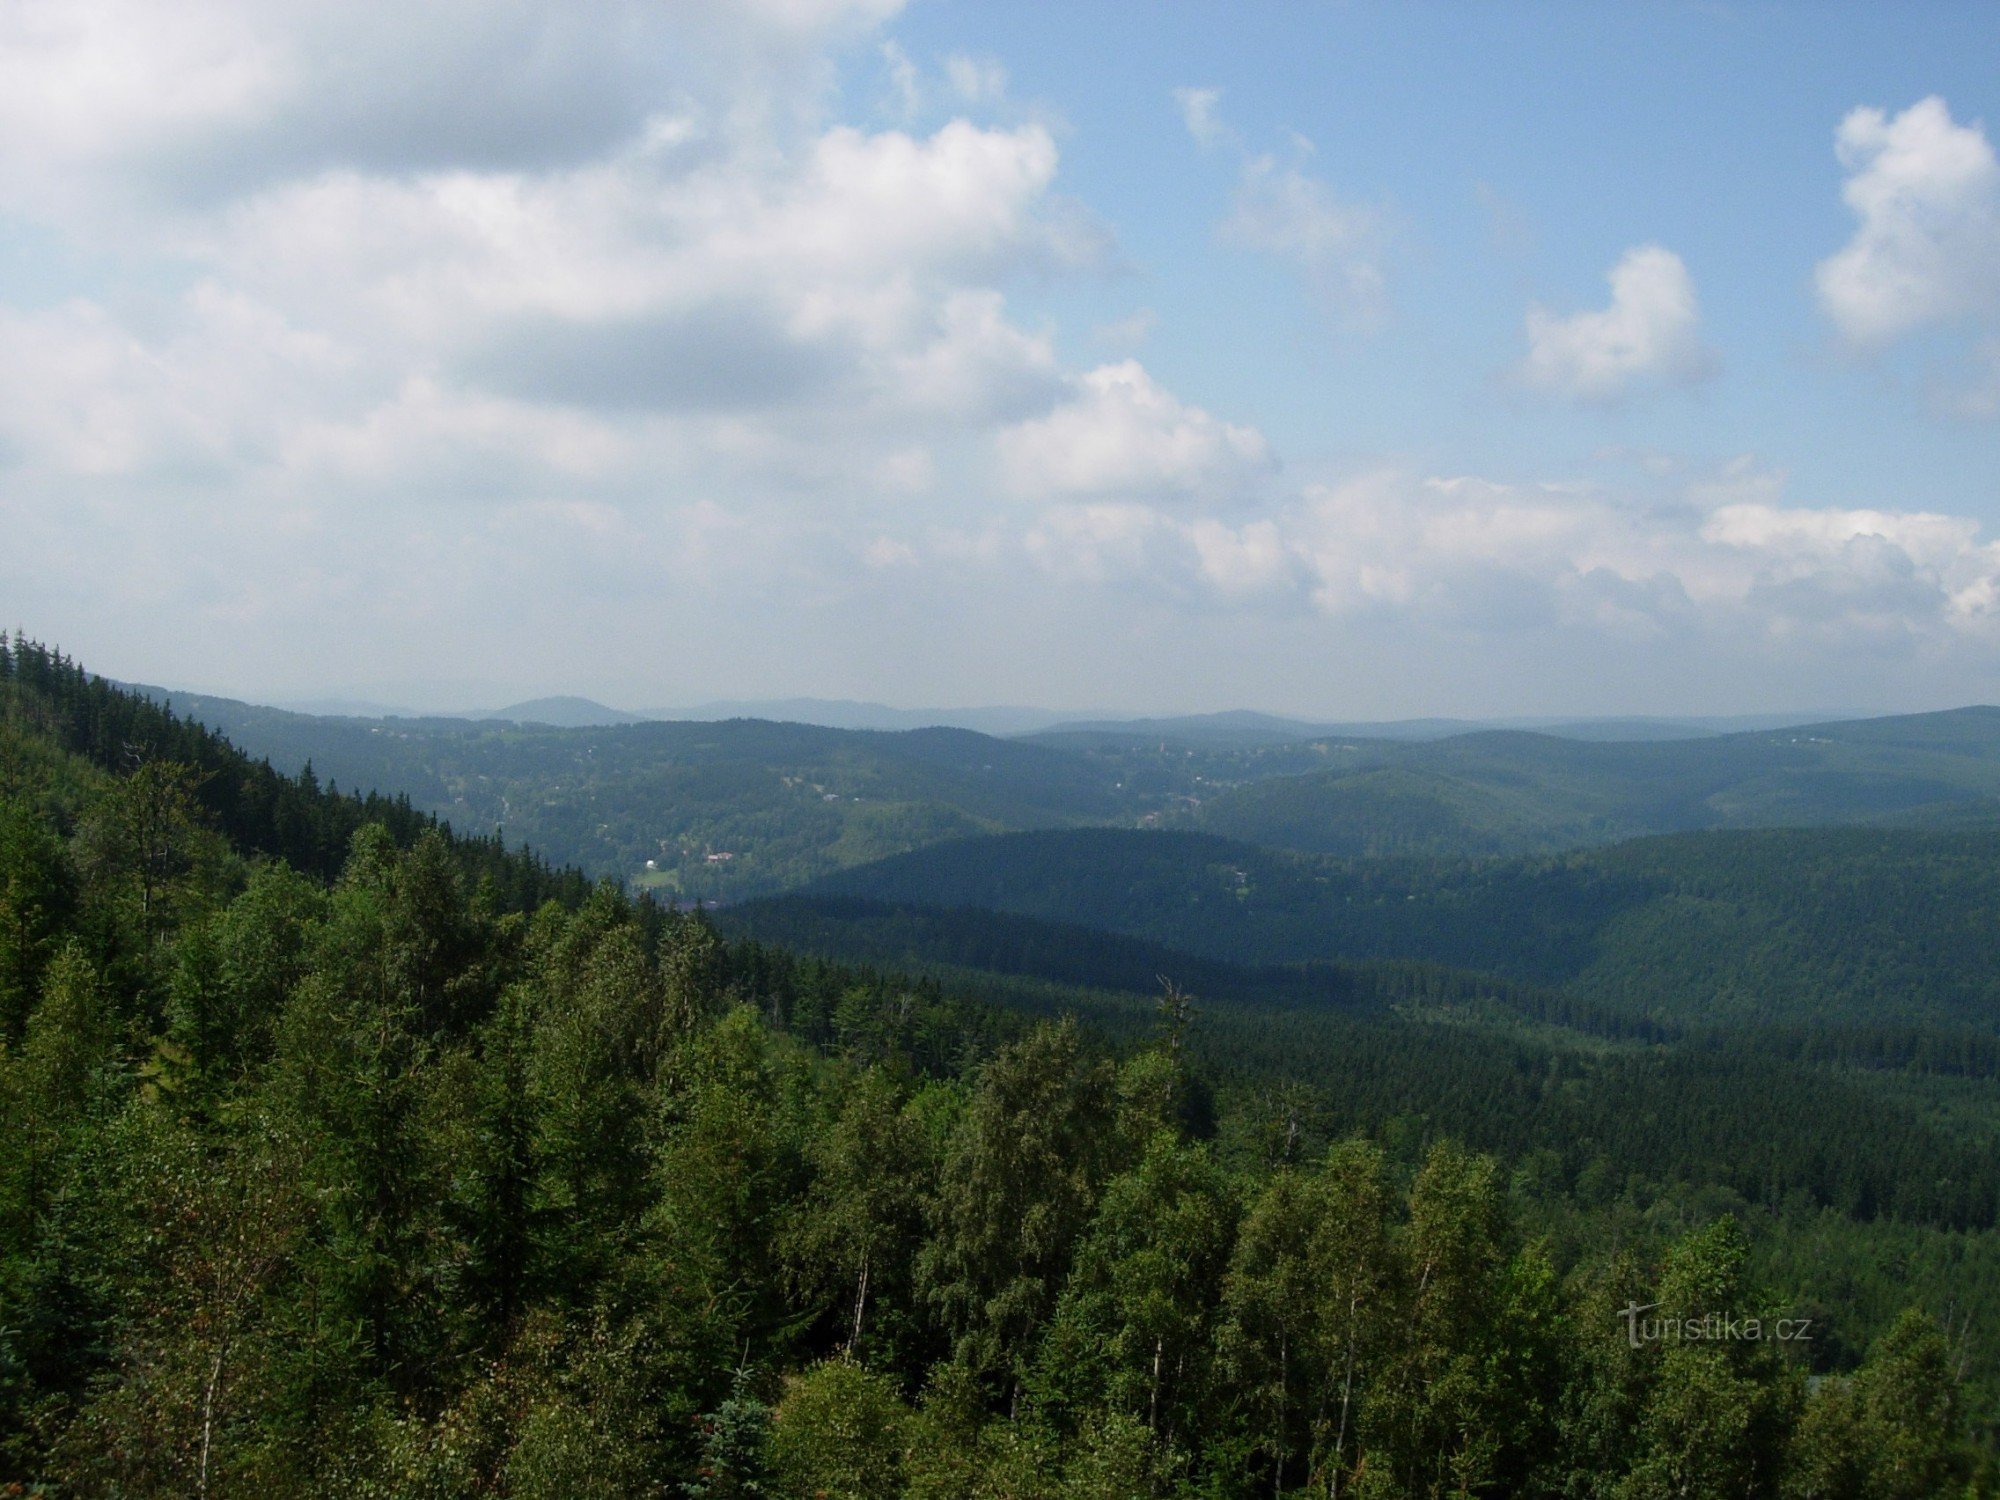 View of the Jizera Mountains from the cable car